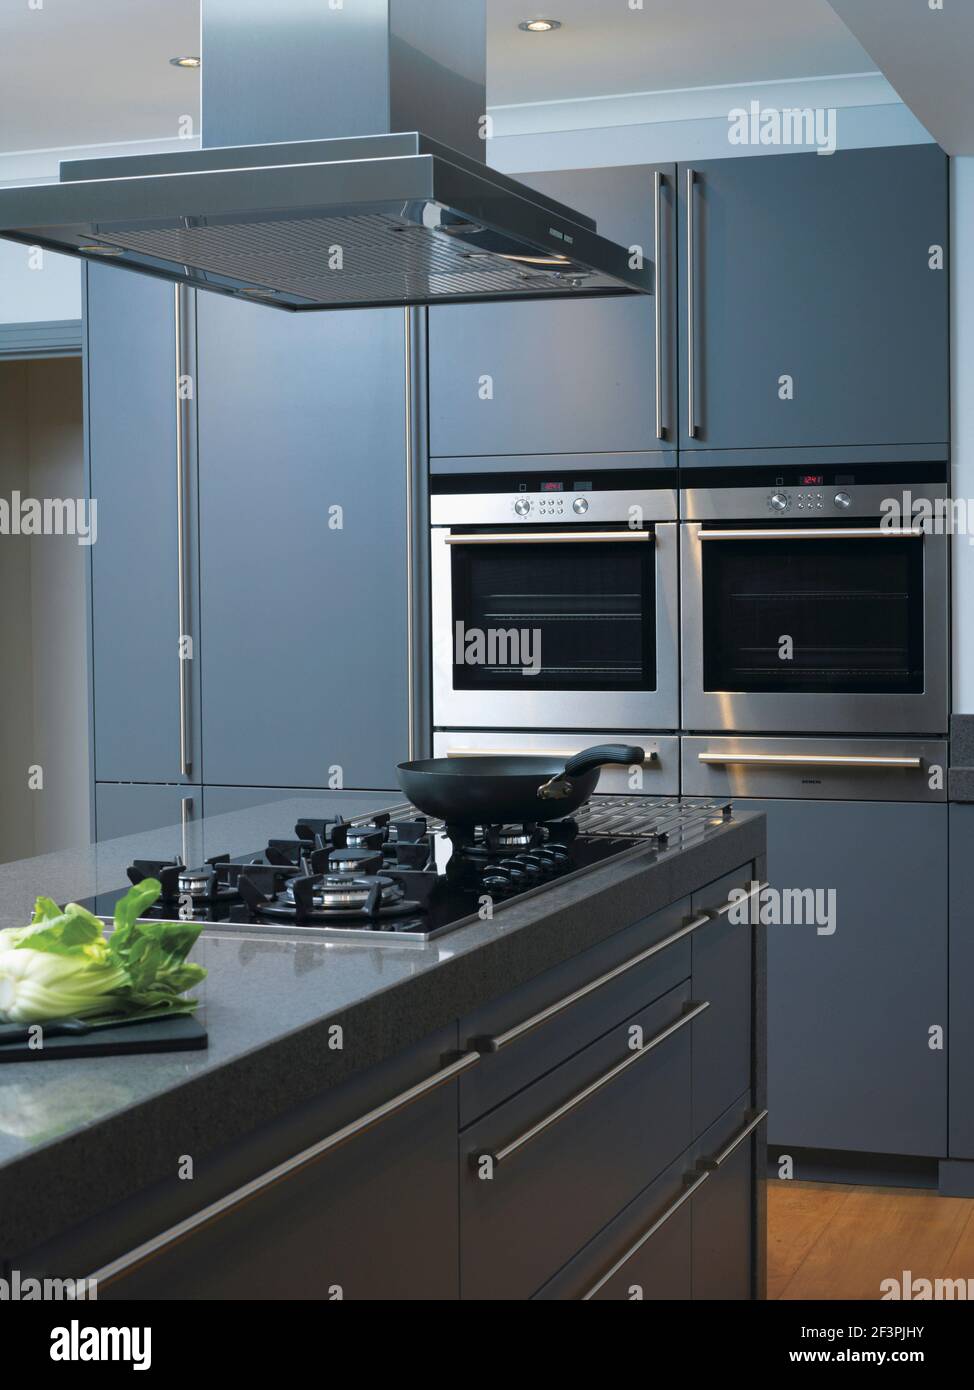 Hob set in central island breakfast bar in contemporary kitchen Stock Photo